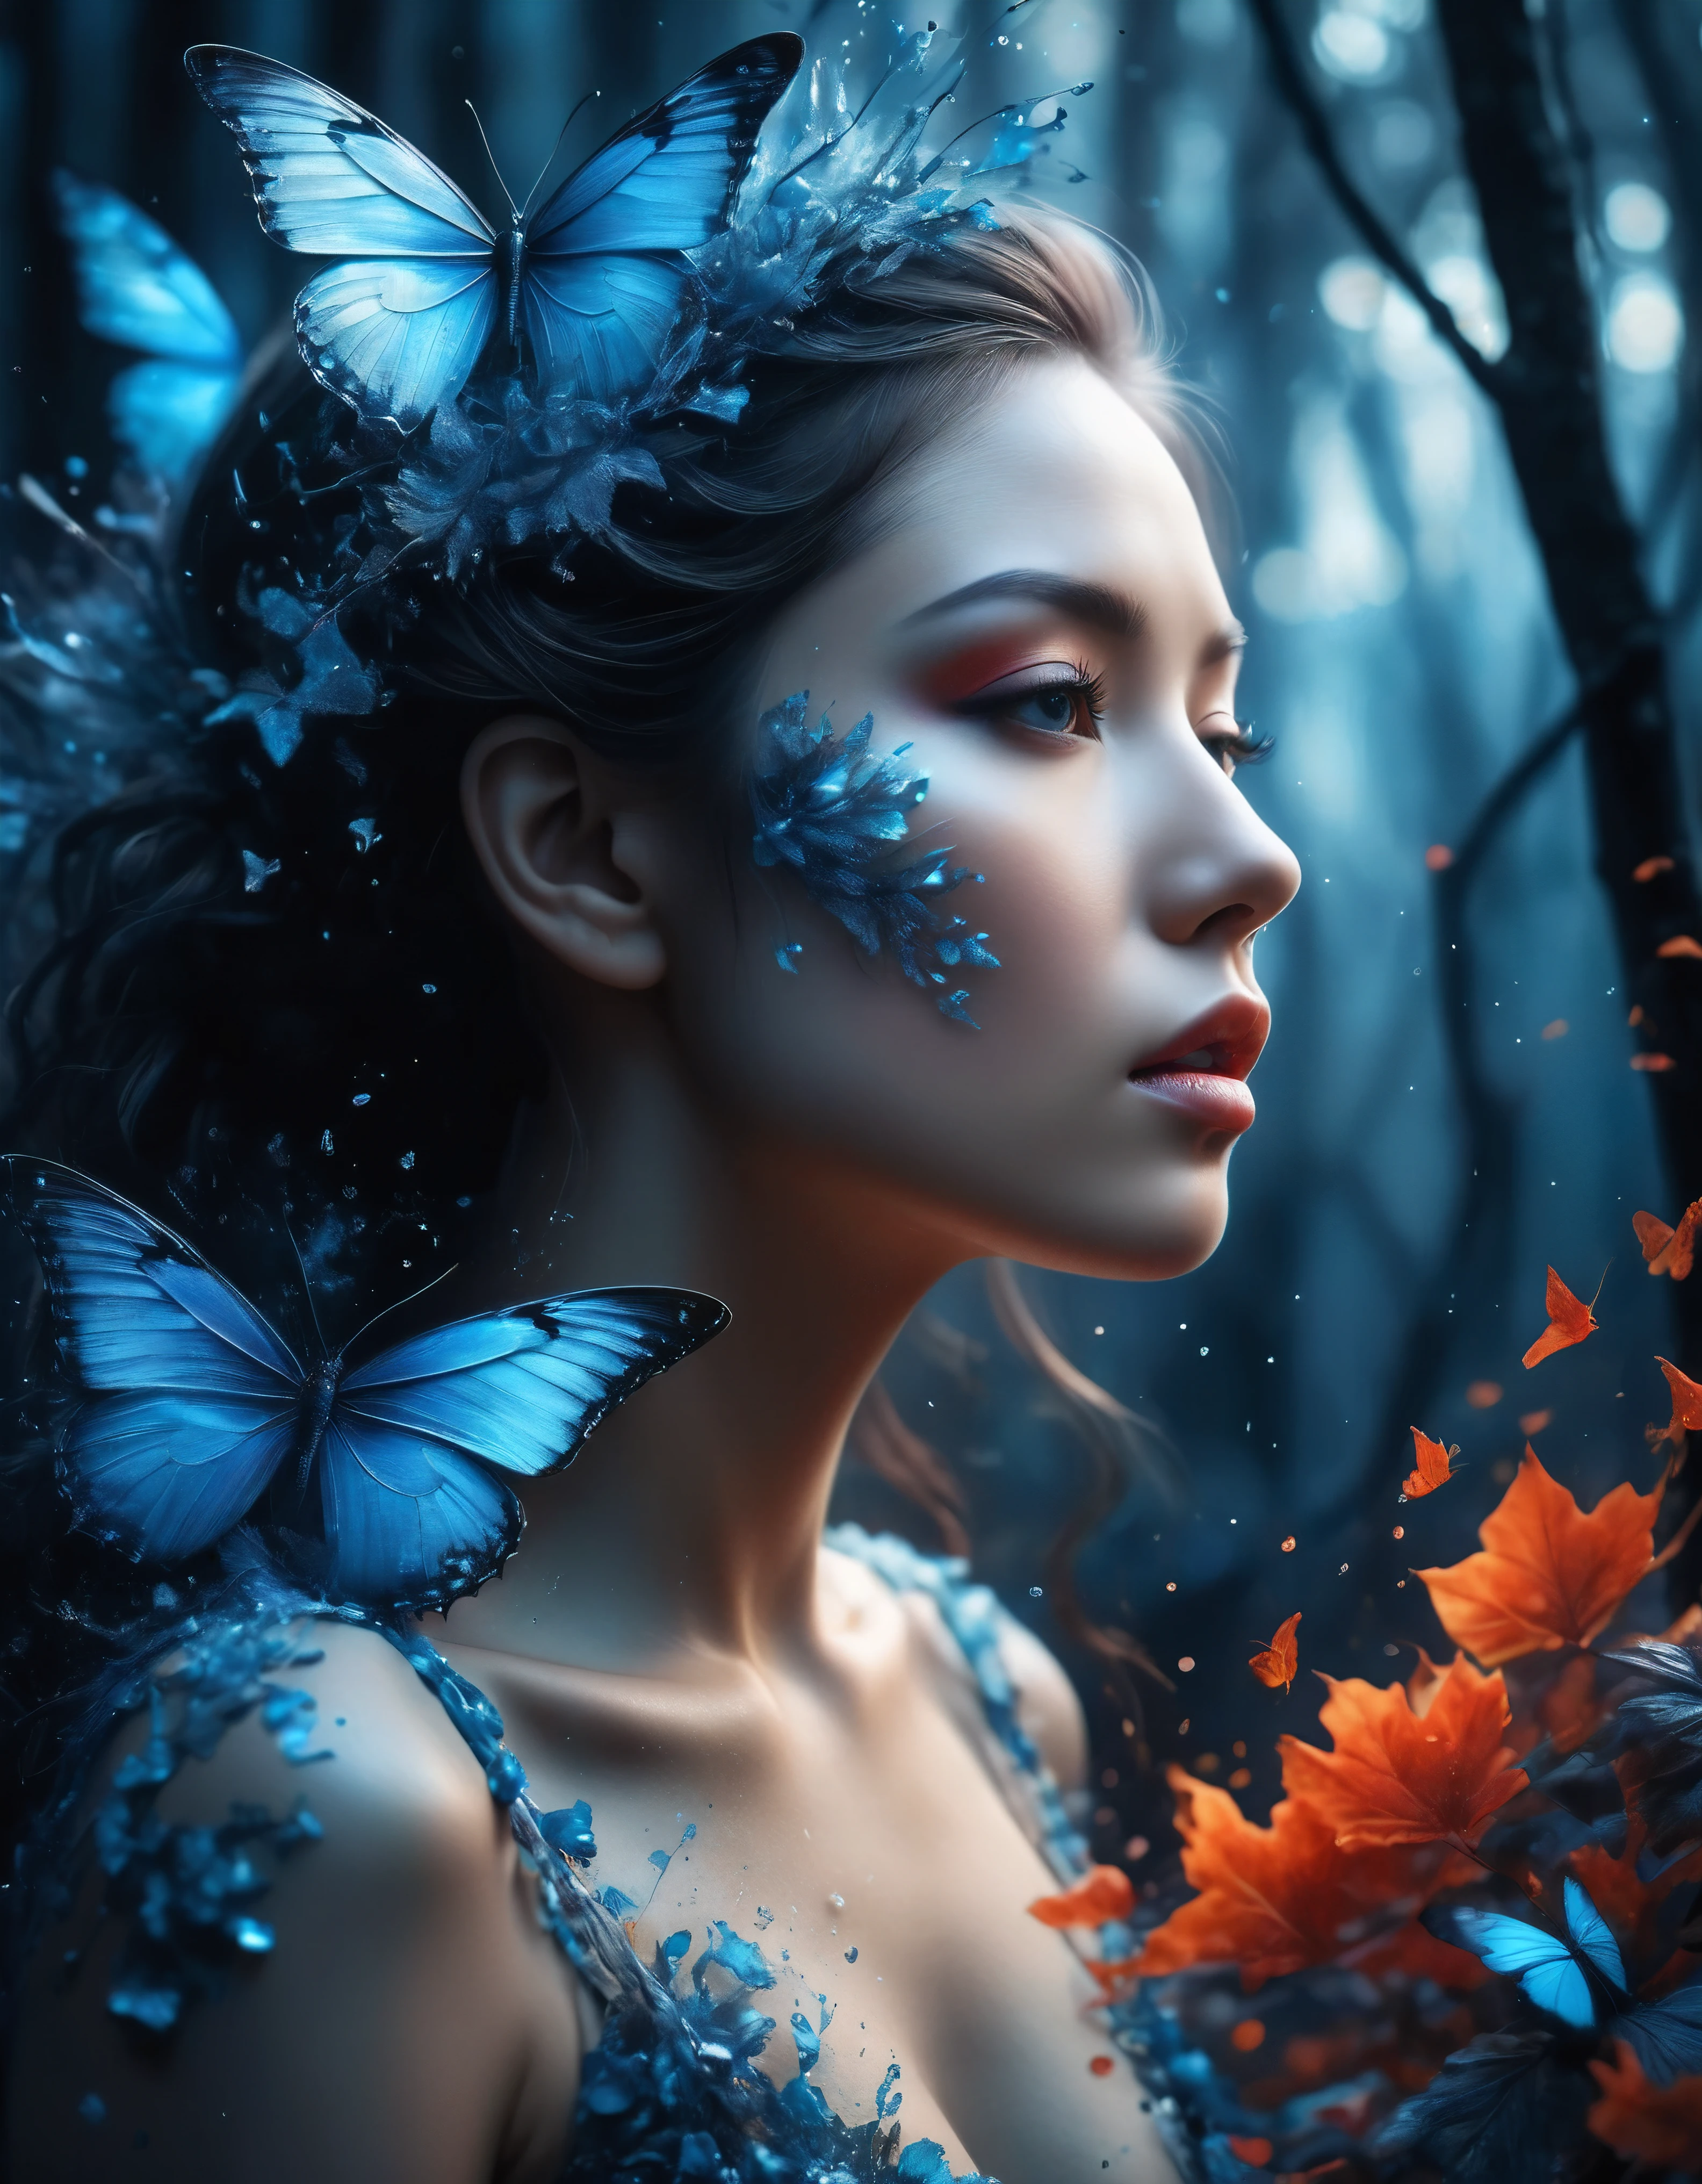 ((Masterpiece in maximum 16K resolution):1.6),((soft_color_photograpy:)1.5), ((Ultra-Detailed):1.4),((Movie-like still images and dynamic angles):1.3) | (double contact:1.3), Beautiful blue butterfly silhouette effect, Superimposed on Pretty Female《dark forest sky》Agnes Cecile, Jeremy Mann, Oil and ink on canvas, fine art, super dramatic light, photoillustration, amazing depth, the ultra-detailed, iridescent red, superfluous dreams, intricately details, amazing depth, Amazing atmosphere, Mesmerizing whimsical vibrant landscapes, Maximalism (beautiful outside, Ugly inside, pressure and pain, beauty and despair, hard and soft, positive and negative, hot and cold, Sweet and sour, Vibrant but boring, Perfect harmony, light and shadows, hot and cold, old and young, Fire and ice, Yin and yang, australian, Black and white, hot and cold, organic and mechanical, Corresponding color, loud and quiet, Chaos and peace, day and night:1.2) The complex masterpiece of a real-time engineering leader. | Rendered in ultra-high definition with UHD and retina quality, this masterpiece ensures anatomical correctness and textured skin with super detail. With a focus on high quality and accuracy, this award-winning portrayal captures every nuance in stunning 16k resolution, immersing viewers in its lifelike depiction. | ((perfect_composition, perfect_design, perfect_layout, perfect_detail, ultra_detailed)), ((enhance_all, fix_everything)), More Detail, Enhance.